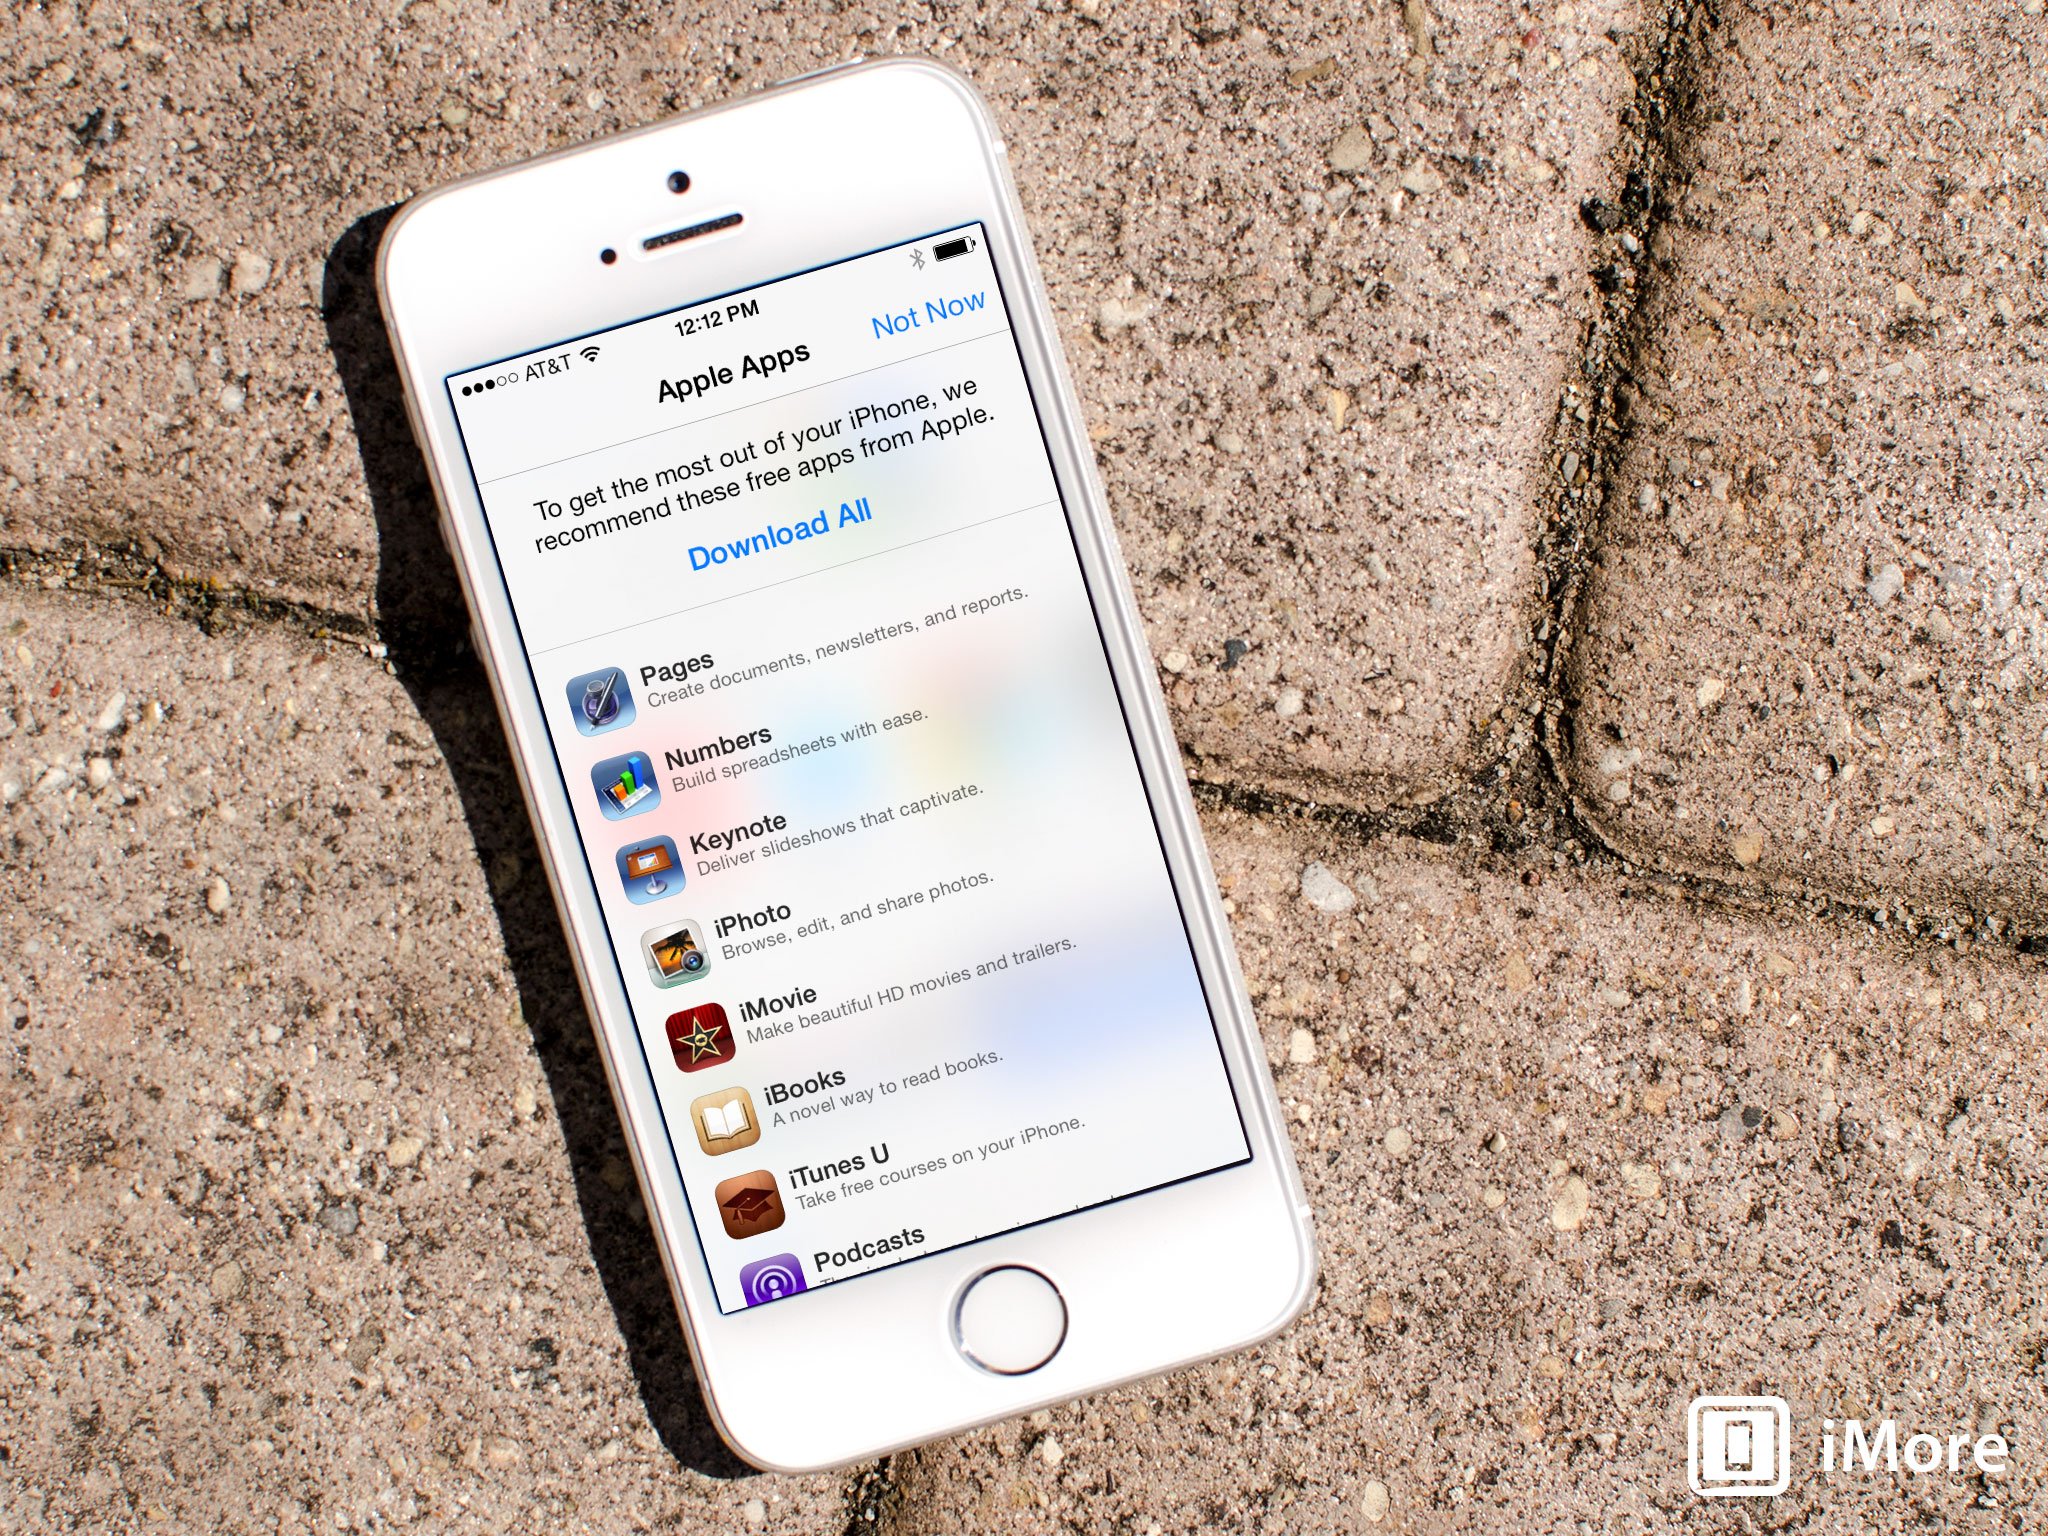 How to get all the iWork apps, iPhoto, and iMovie for free on an eligible iPhone or iPad